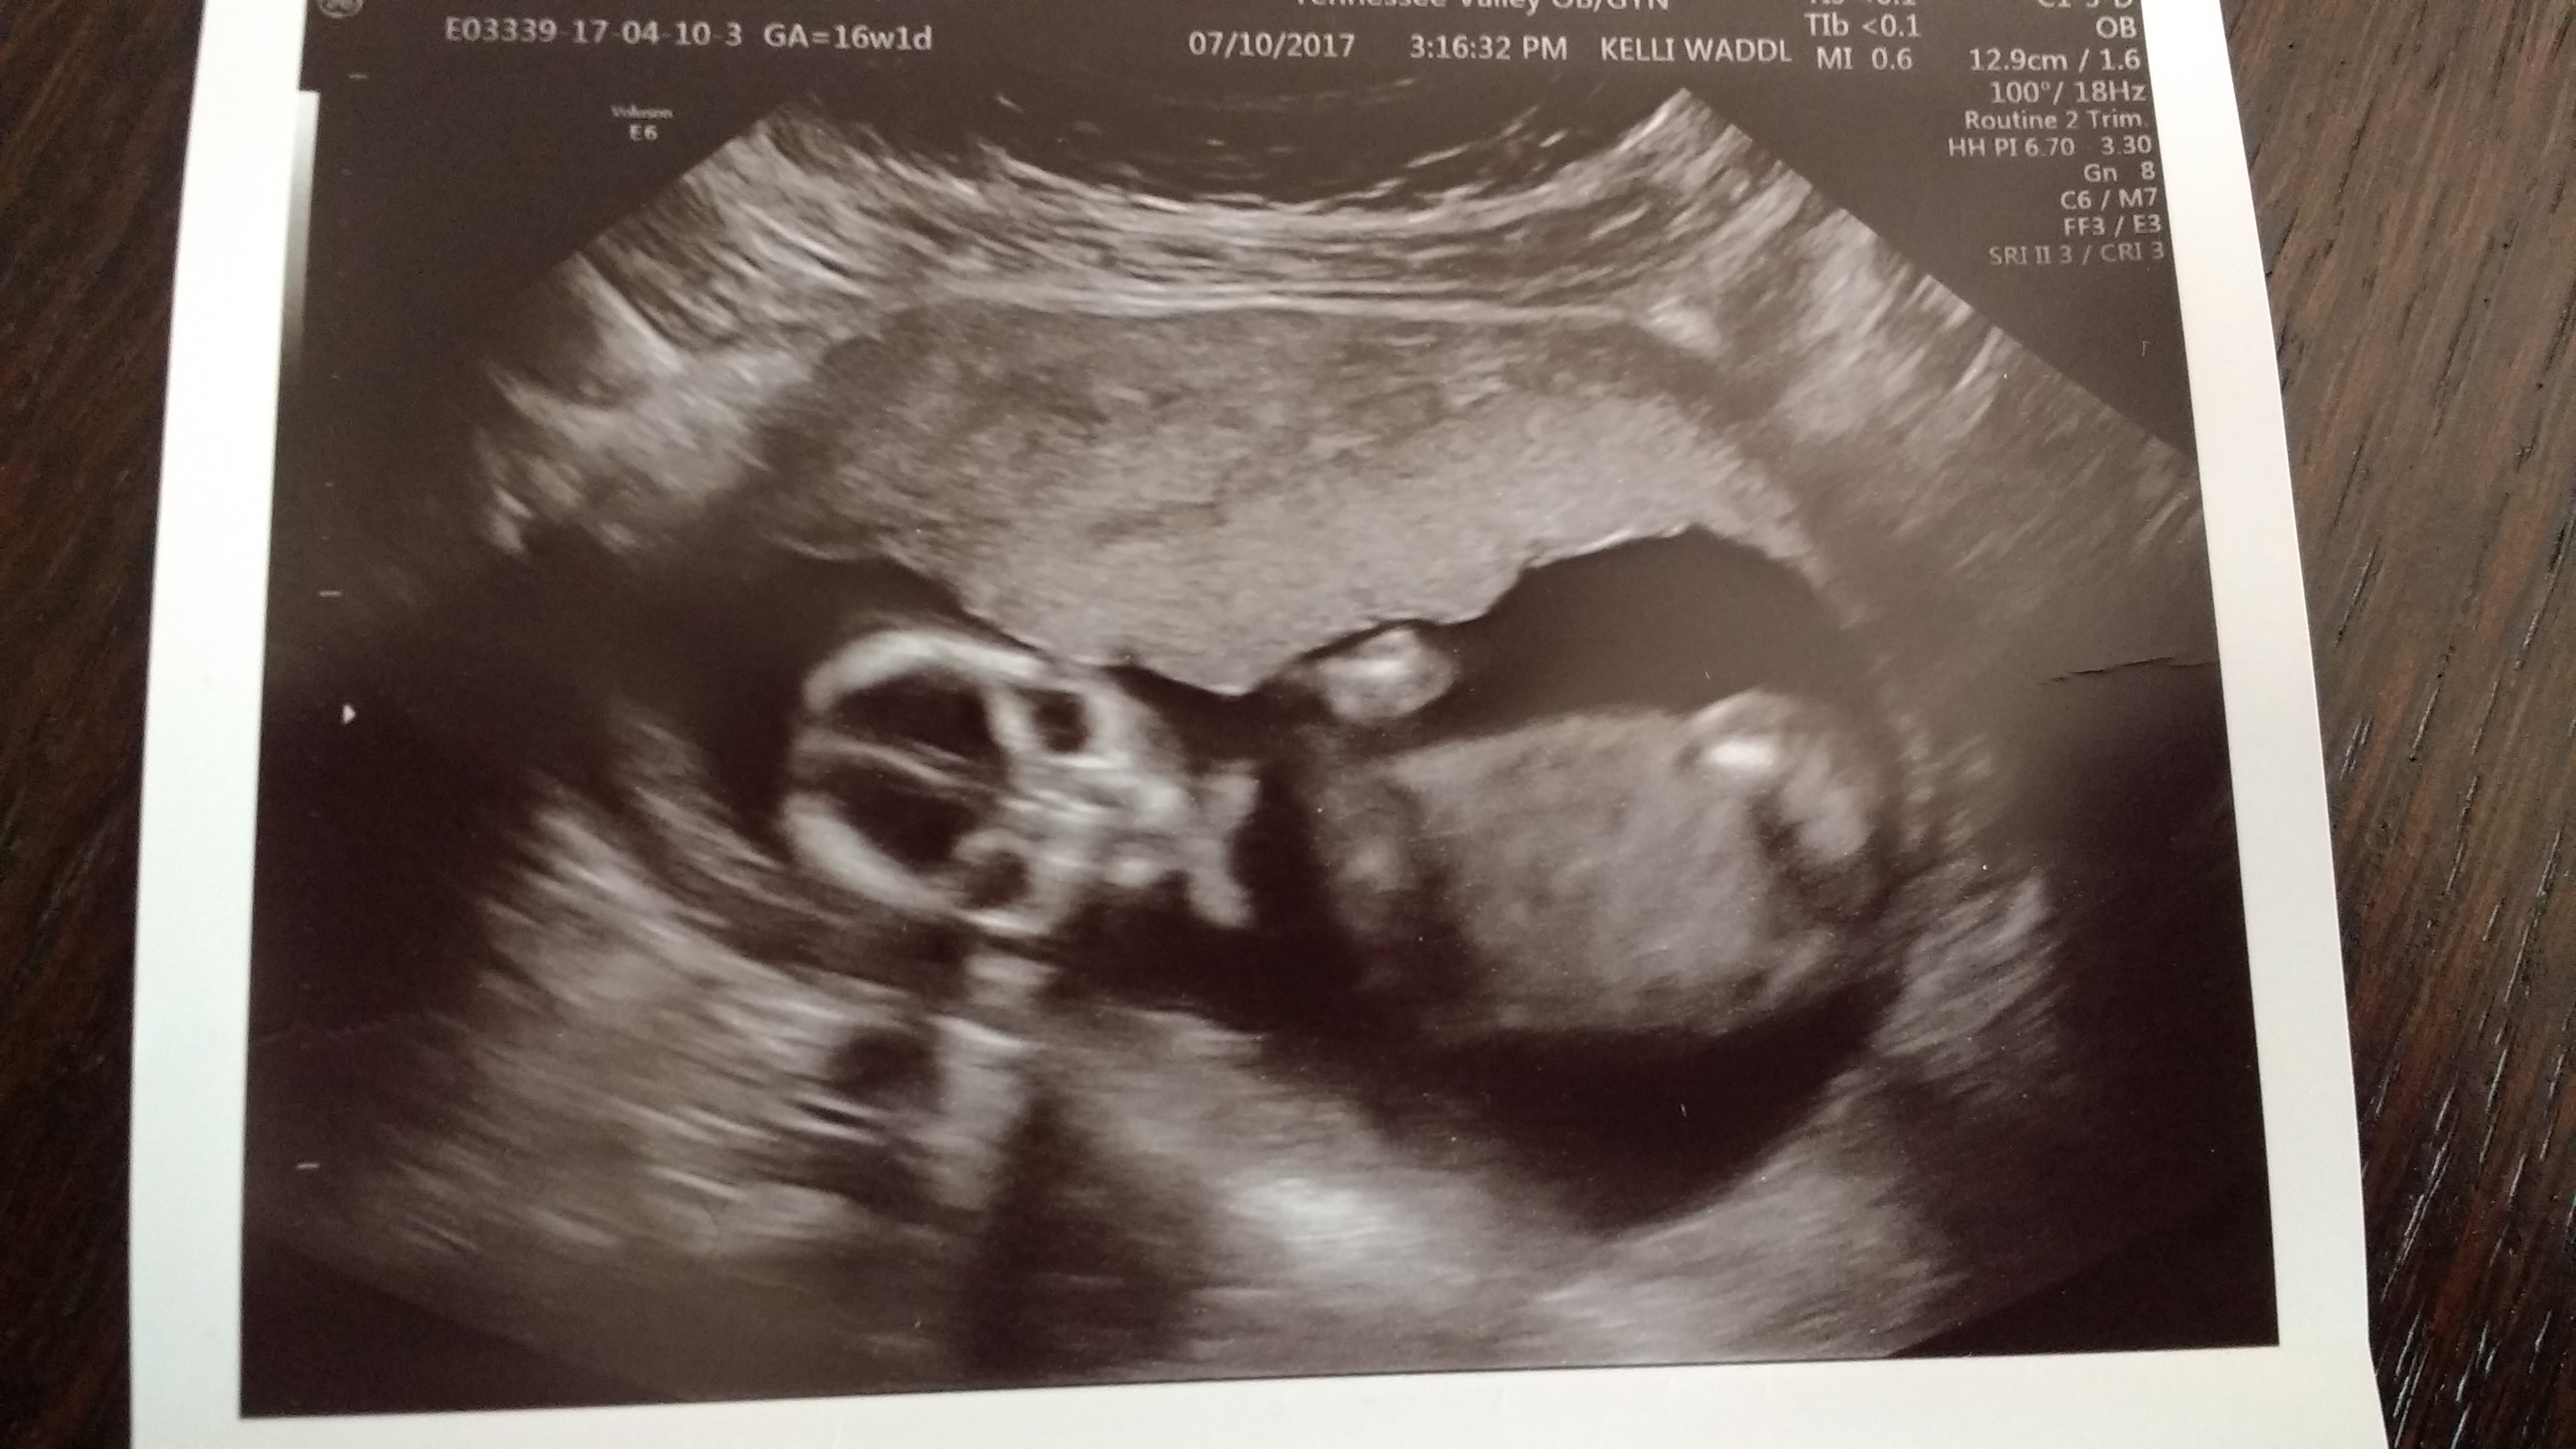 Creepy ultrasound picture!! - December 2017 Babies | Forums | What ...